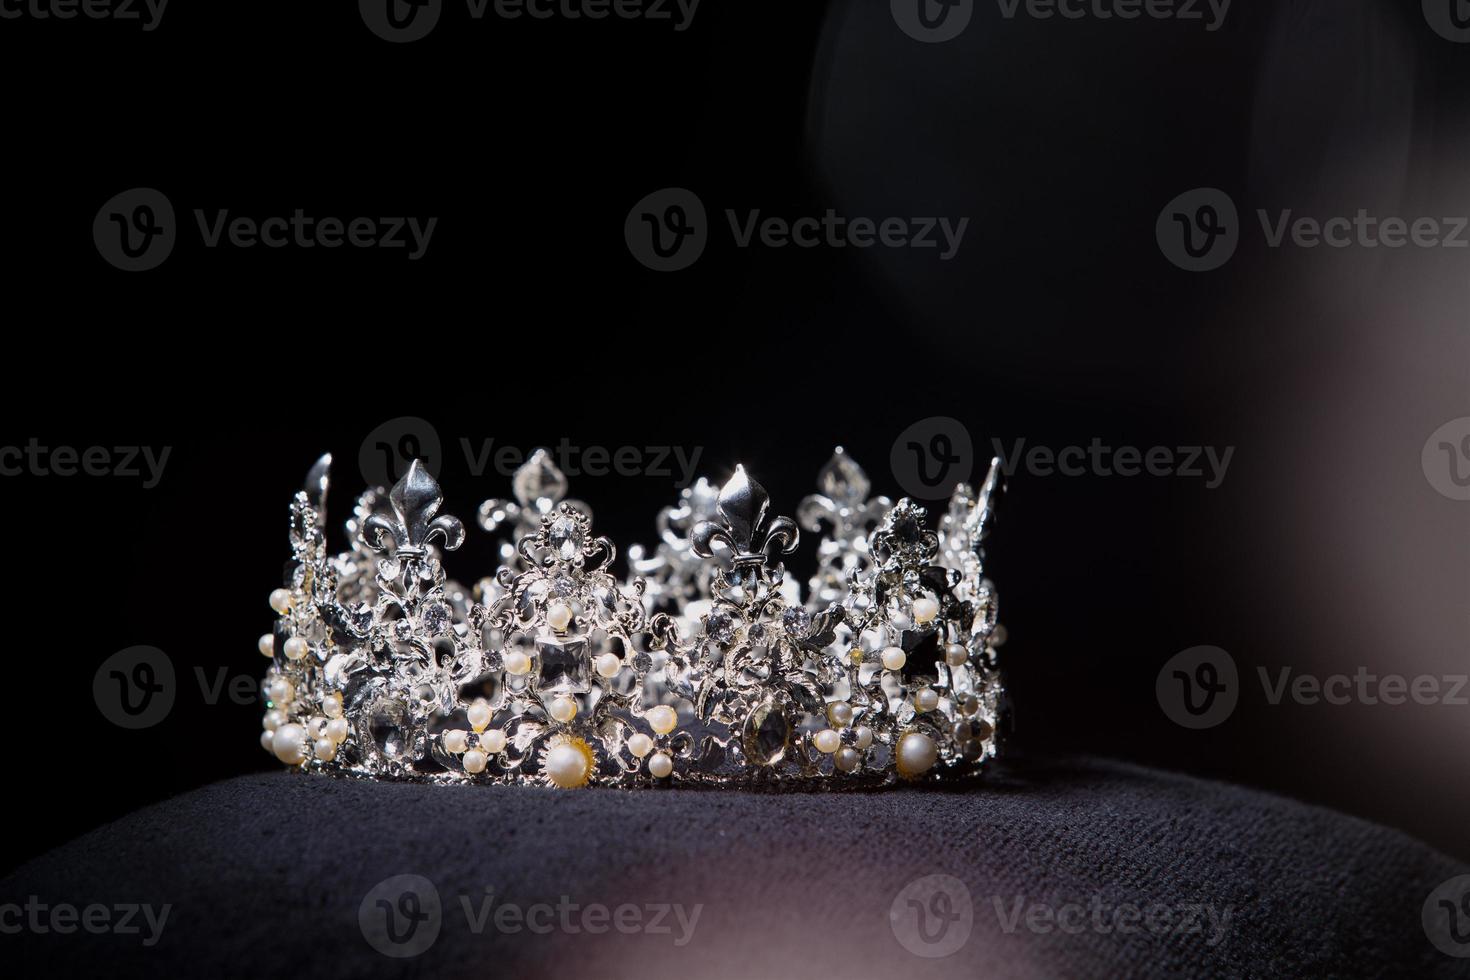 Diamond Silver Crown for Miss Pageant Beauty Contest, Crystal Tiara jewelry decorated gems stone and abstract dark background on black velvet fabric cloth, Macro photography copy space for text logo photo